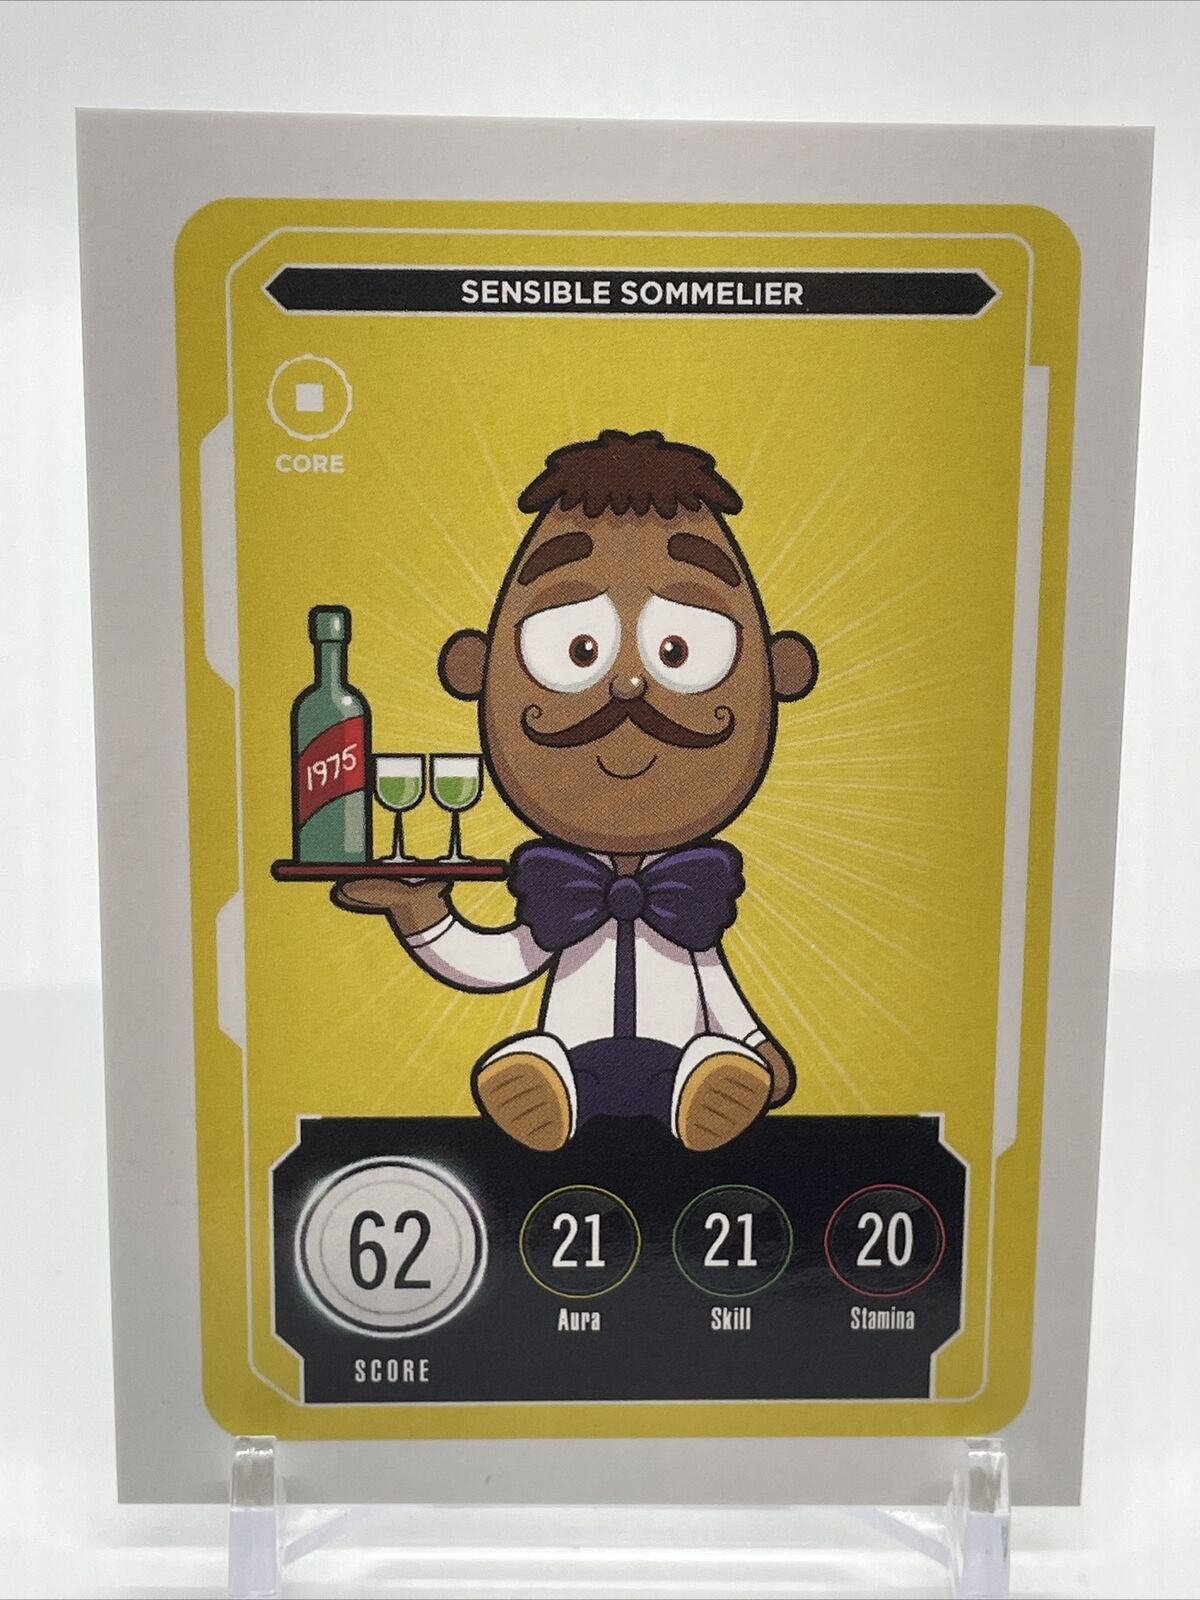 Sensible Sommelier VeeFriends Compete And Collect Card Series 2 ZeroCool Gary 